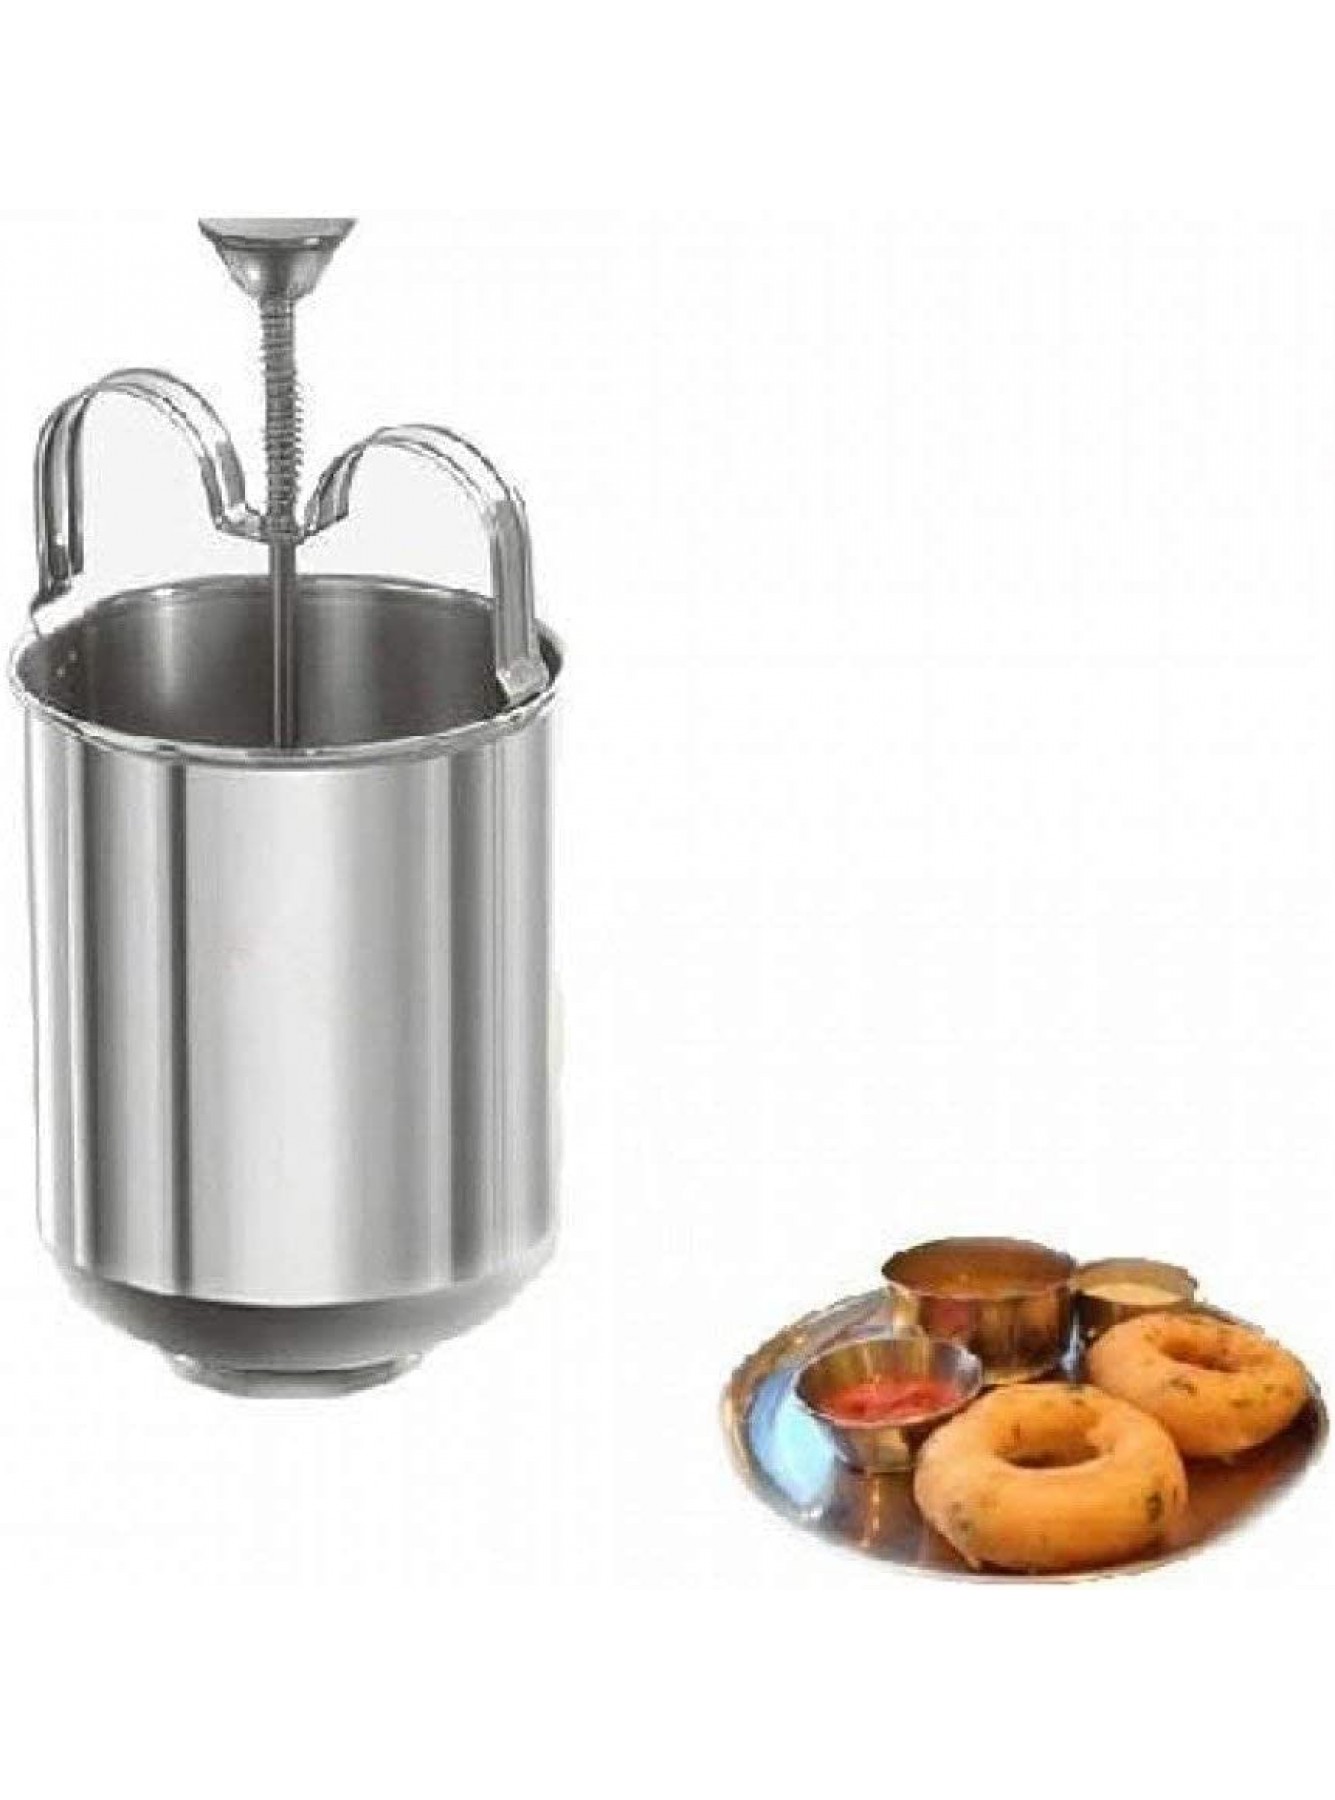 HANS PRODUCT Stainless steel Medu Vada Donut Maker Dispenser Perfectly Shaped & Crispy Medu Vada Hygienic Without Any Hassle Kitchen Gadgets Tools South Indian Dishes Utensils B09R7QMTRB